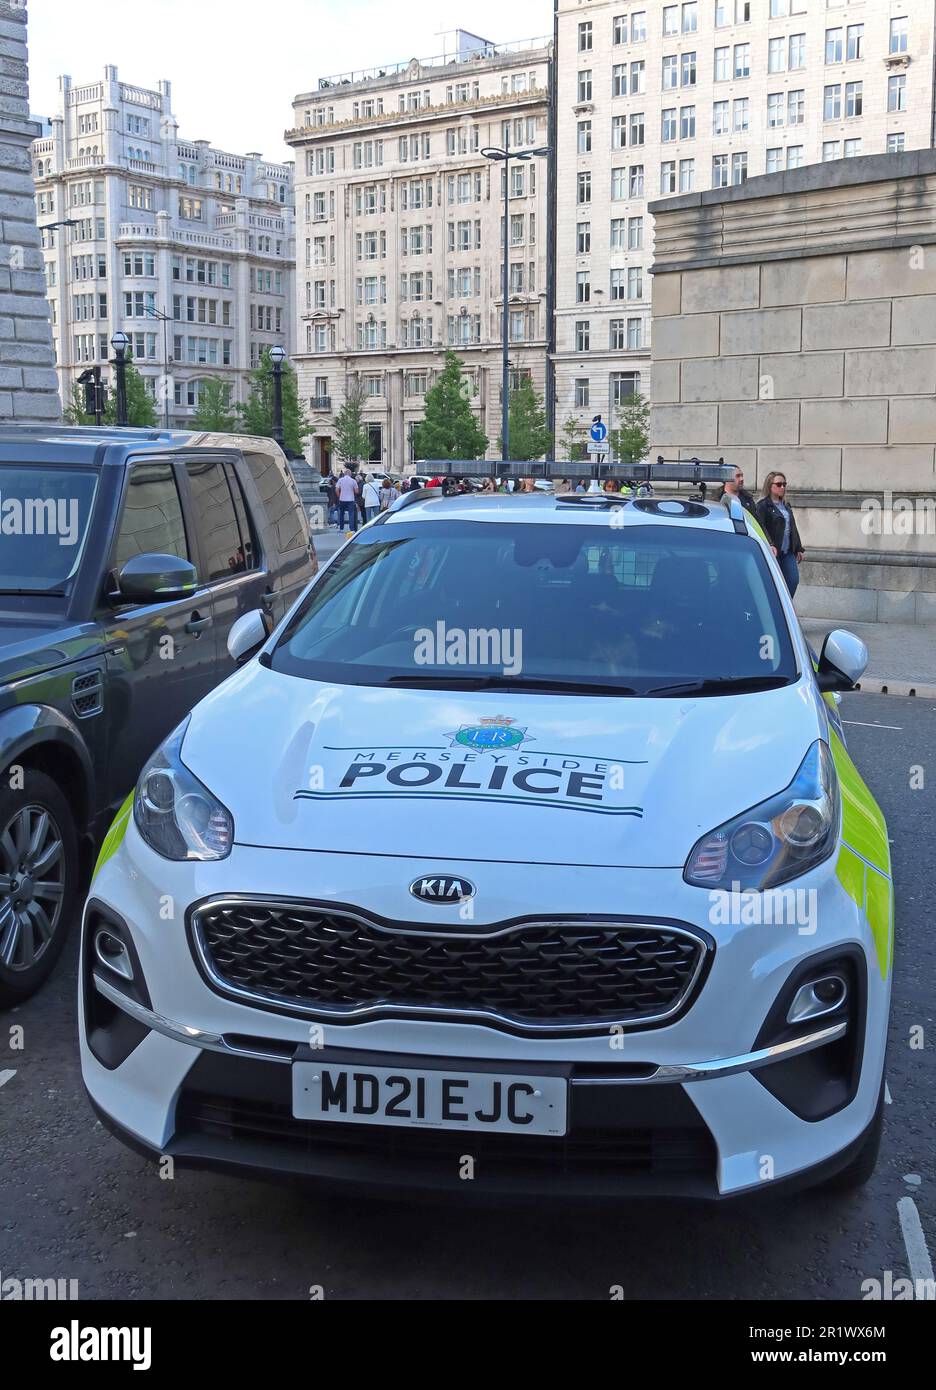 Merseyside police vehicle, Kia,  MD21EJC, parked in the Albert Dock, Liverpool city centre, Merseyside, England, UK, L3 4AF Stock Photo